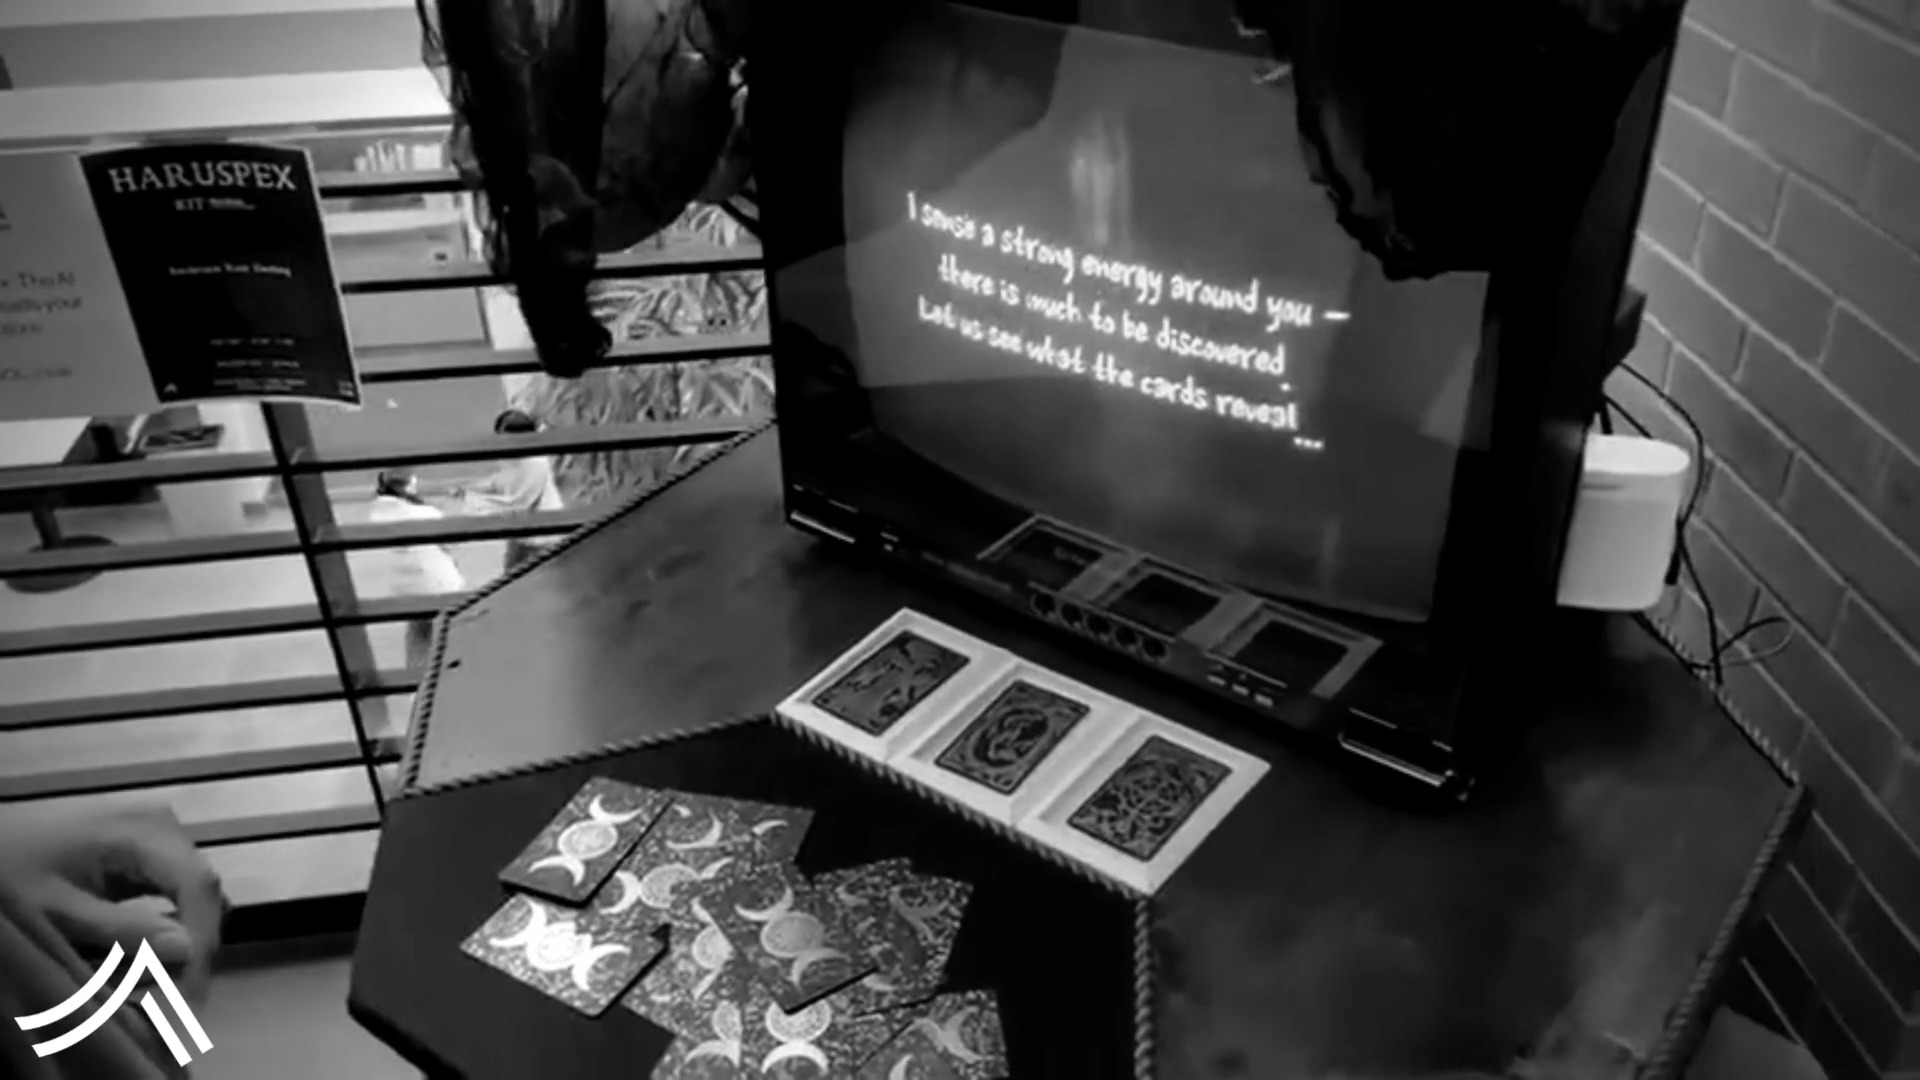 Haruspex running on a CRT, with three tarot cards laid out in front